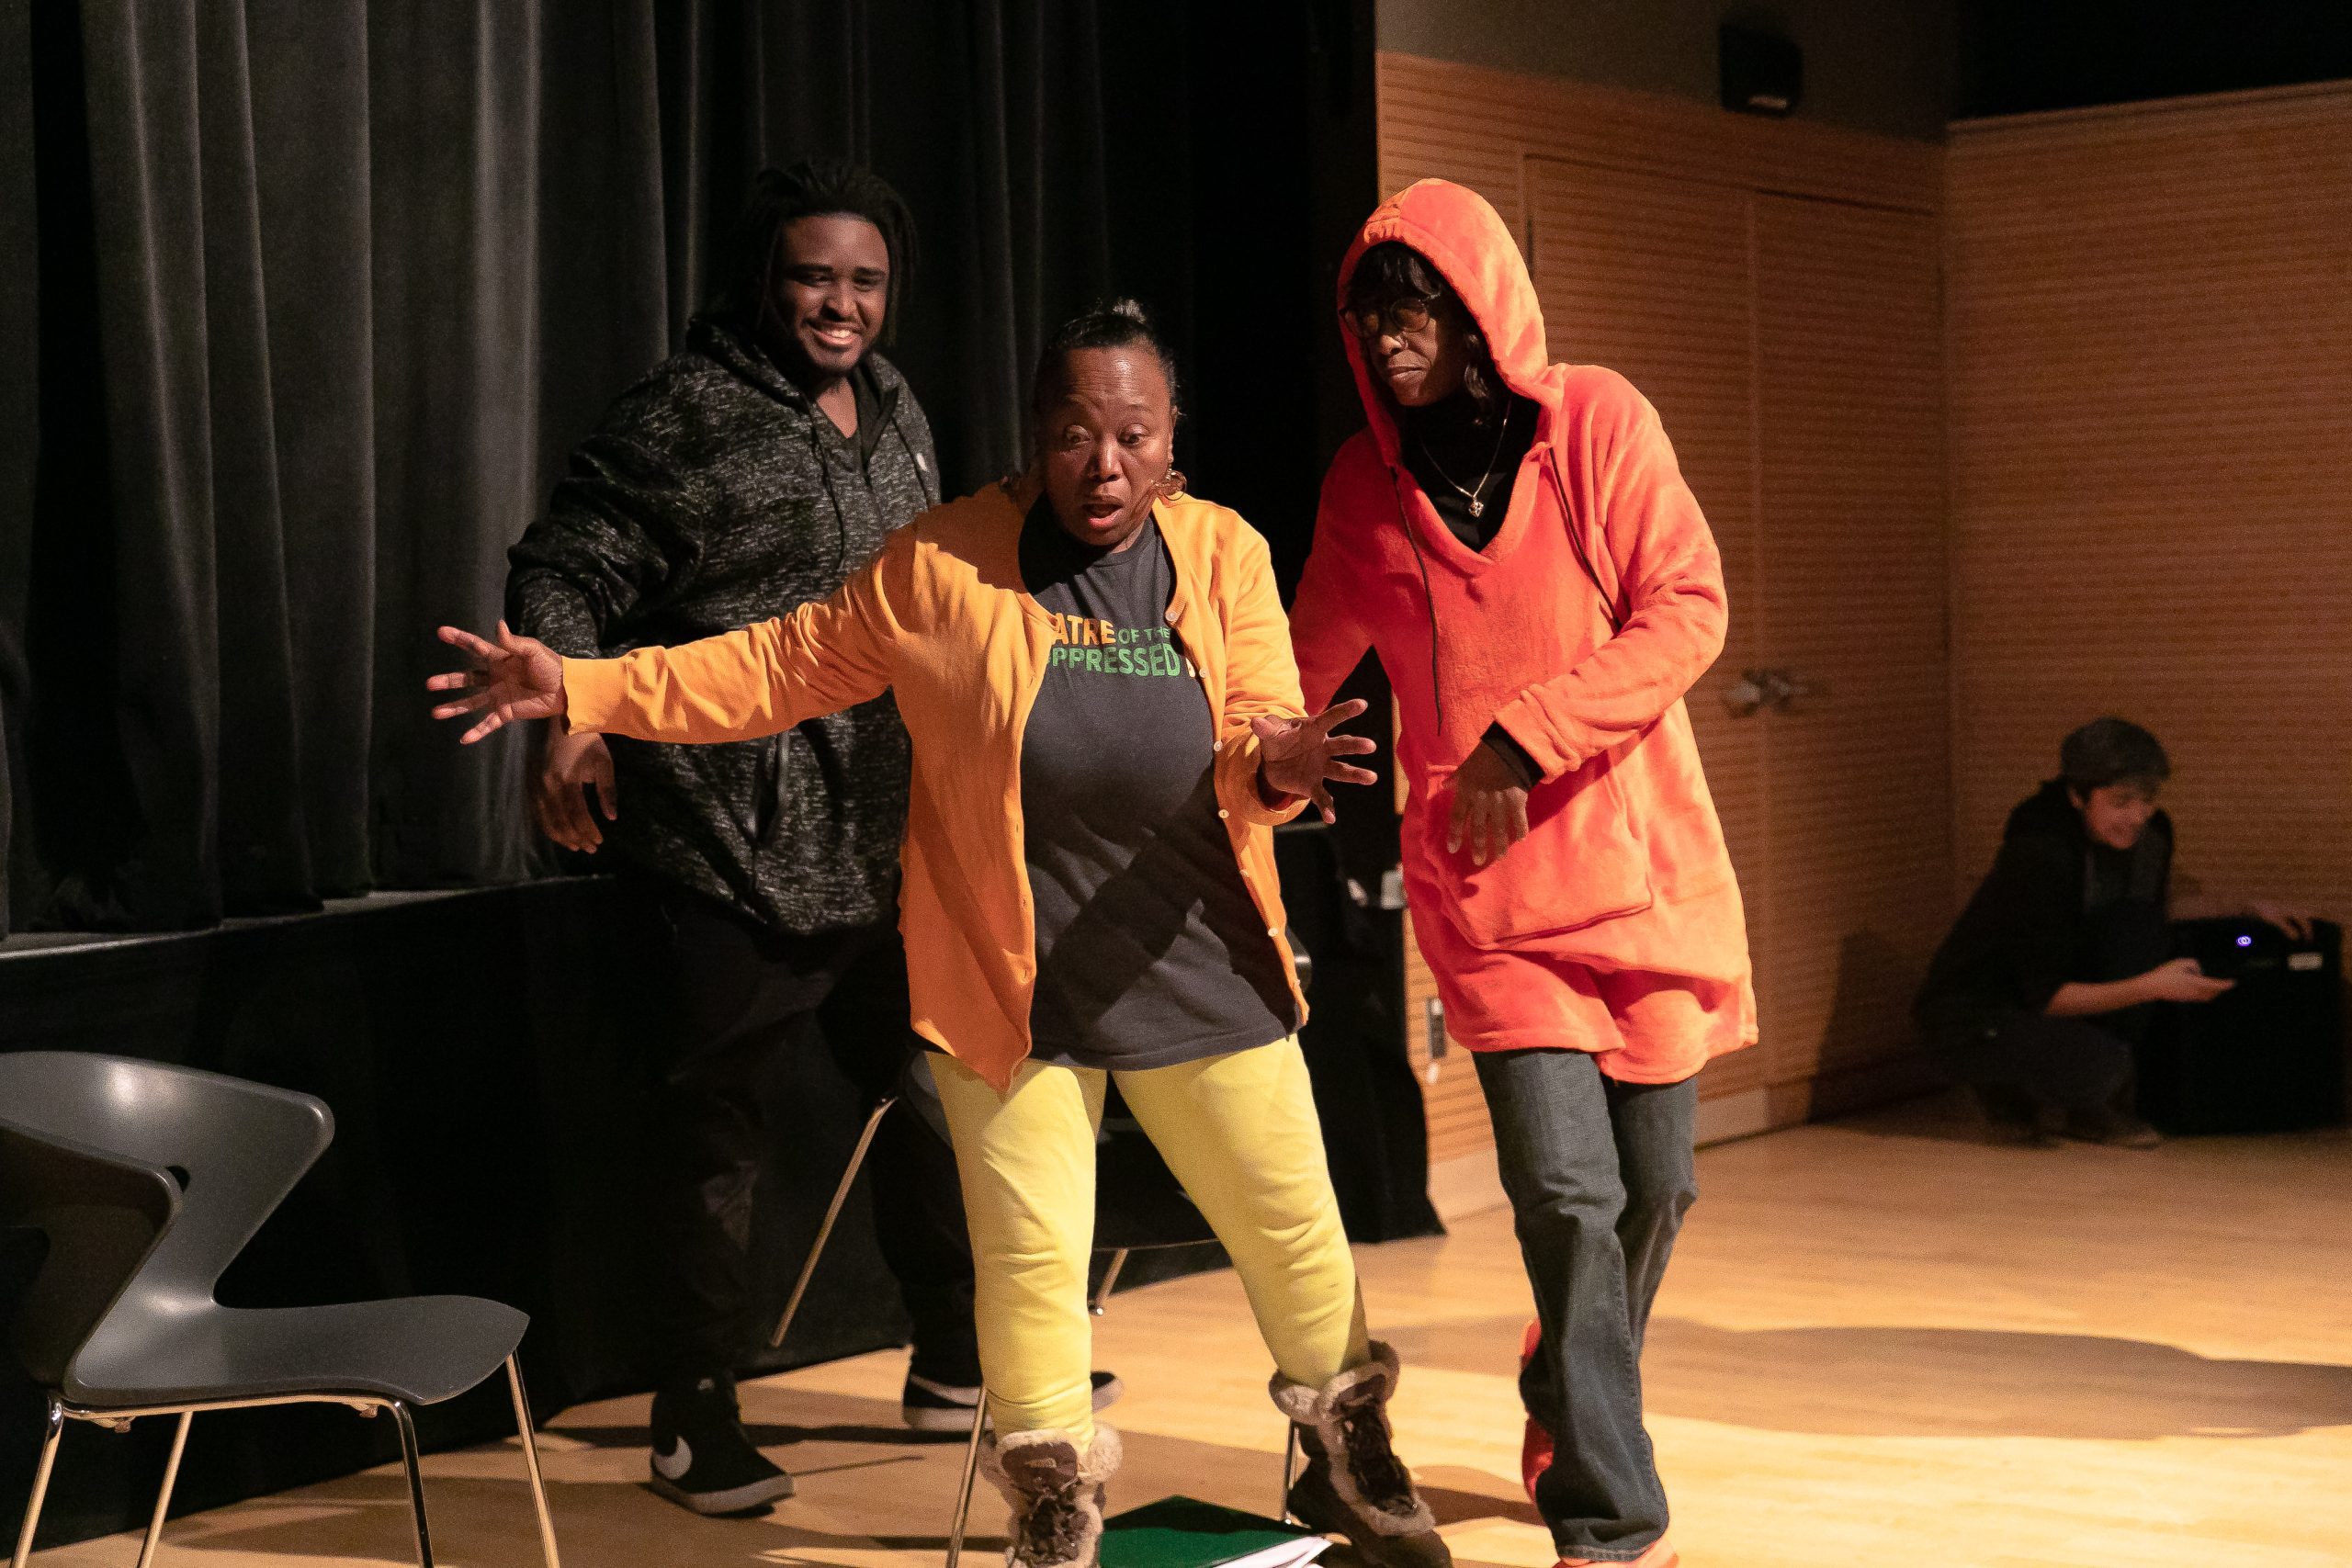 On a spotlit theater stage, three people enact a scene. One is in back, in dark colors. The other two are dressed in bright peaches and yellows, and one is holding her arm out.